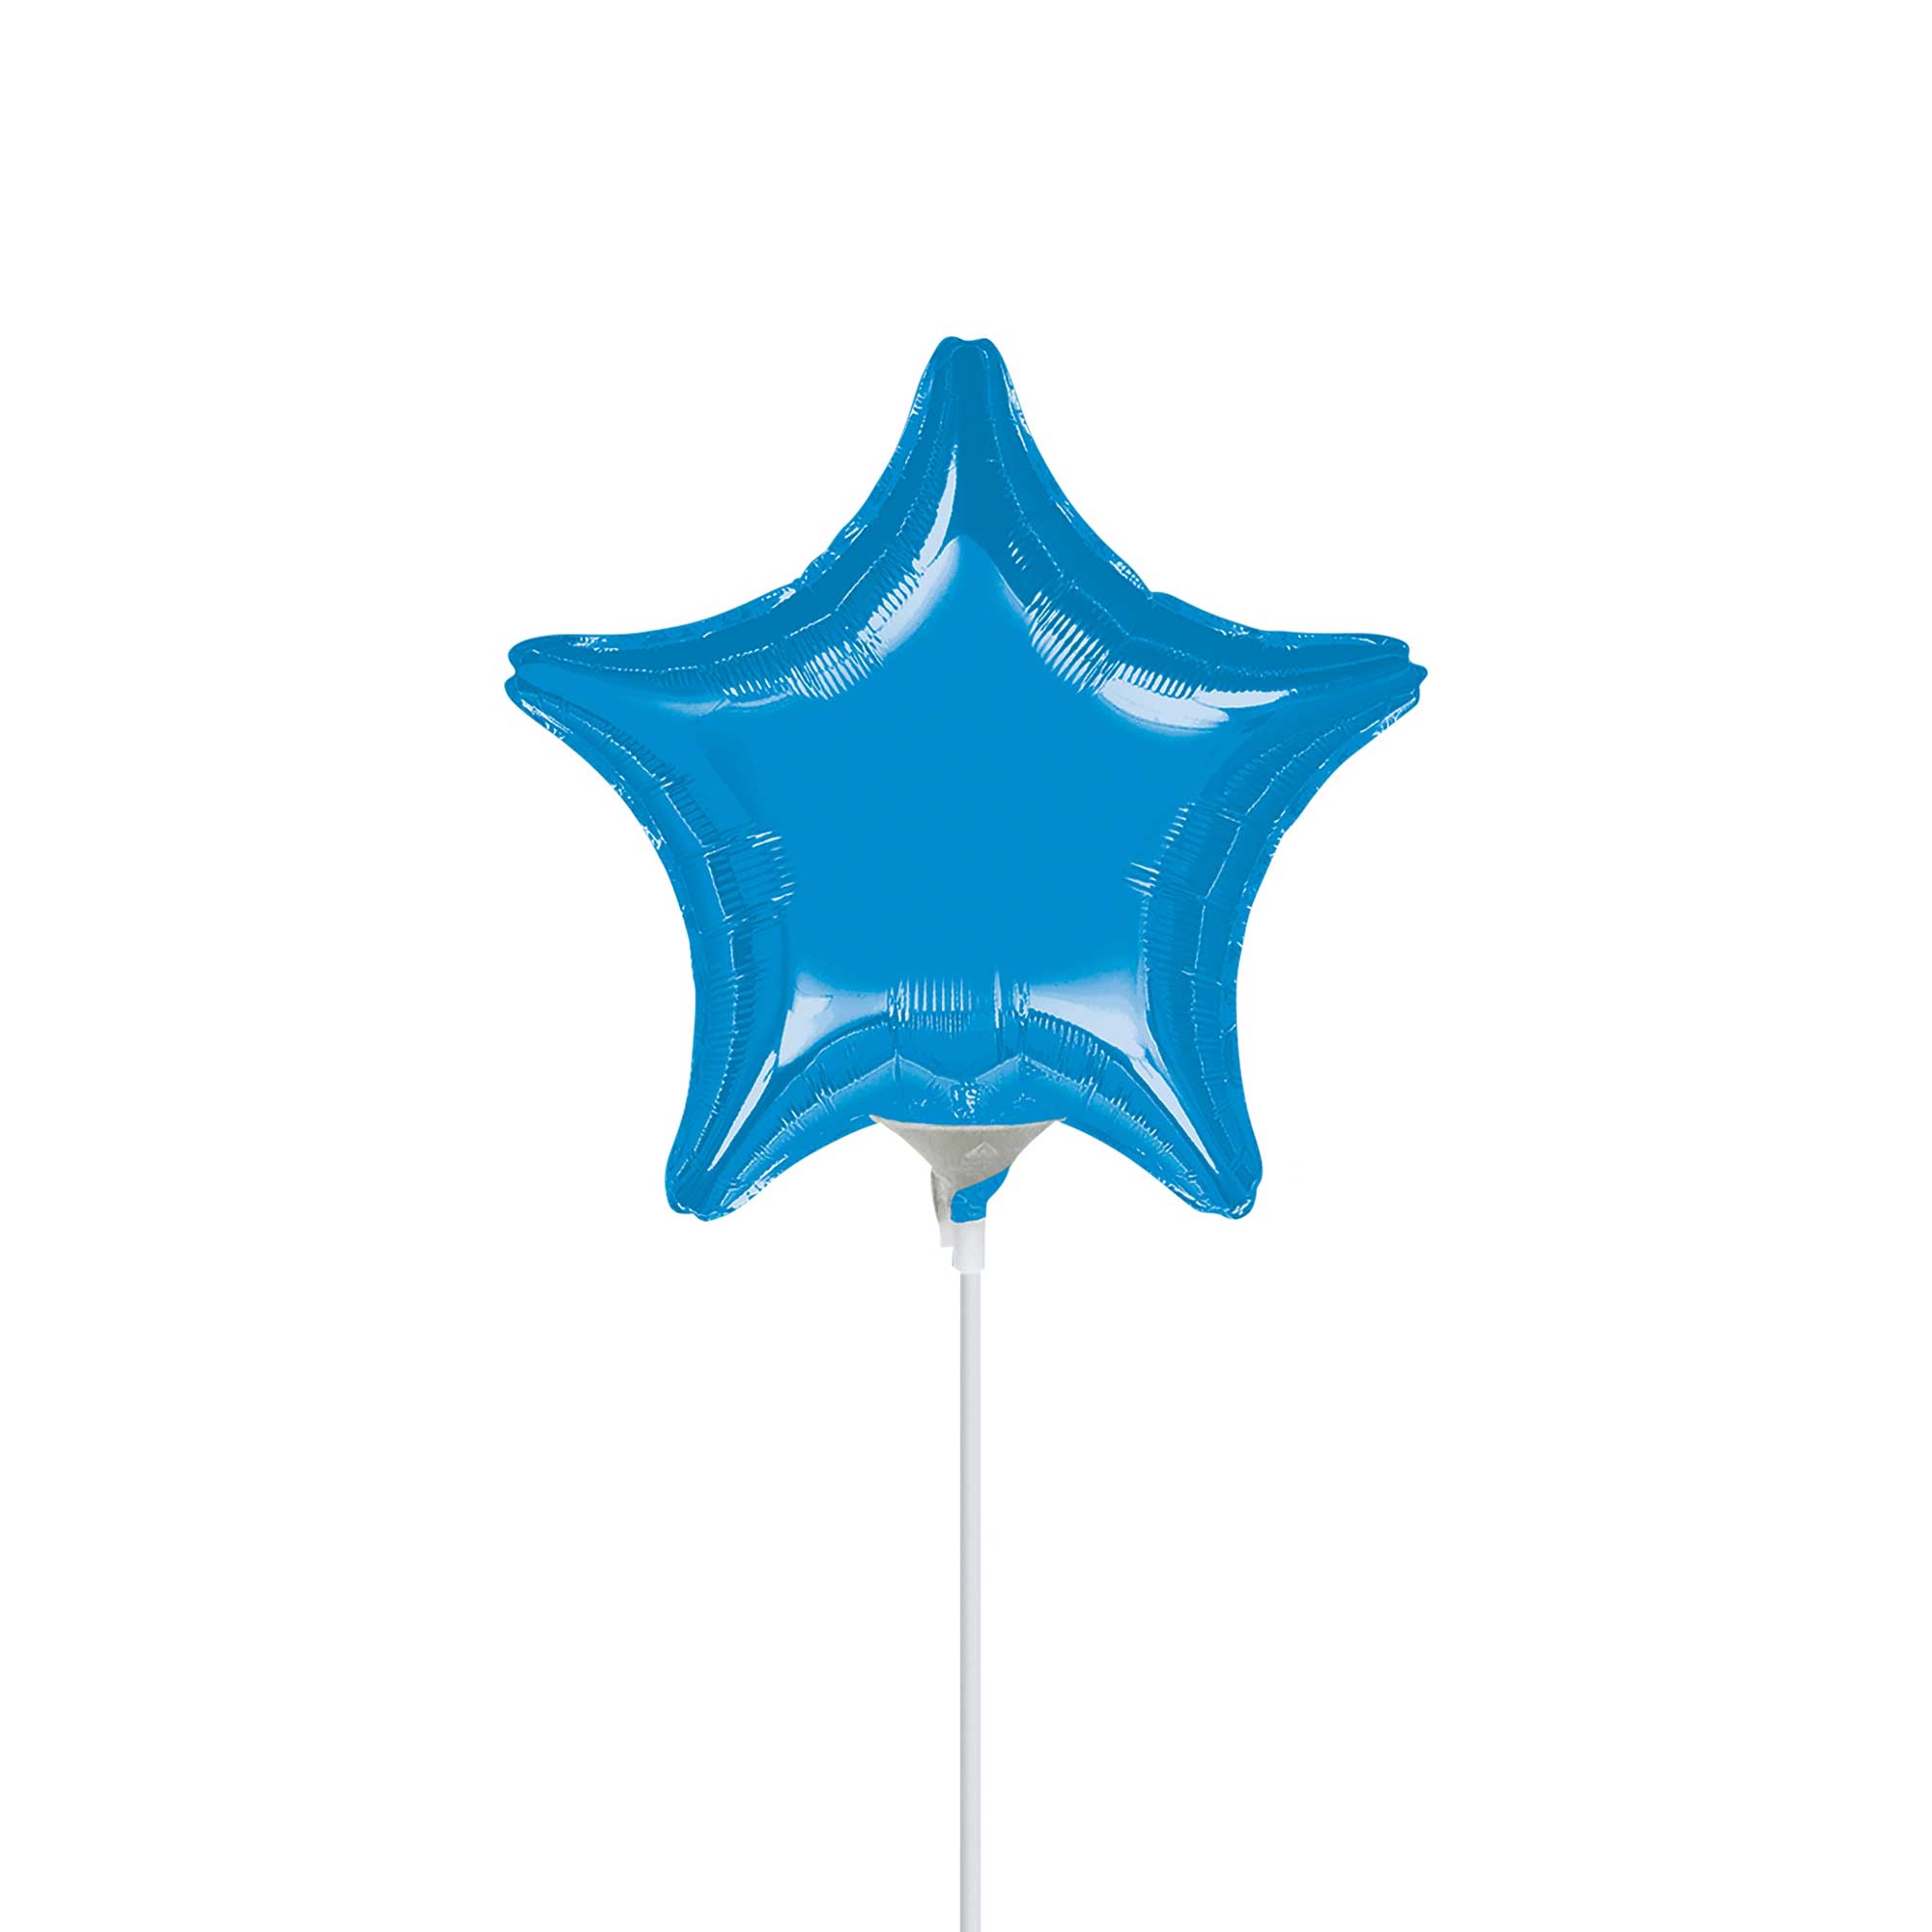 Metallic Blue Star Foil Balloon 9in Balloons & Streamers - Party Centre - Party Centre